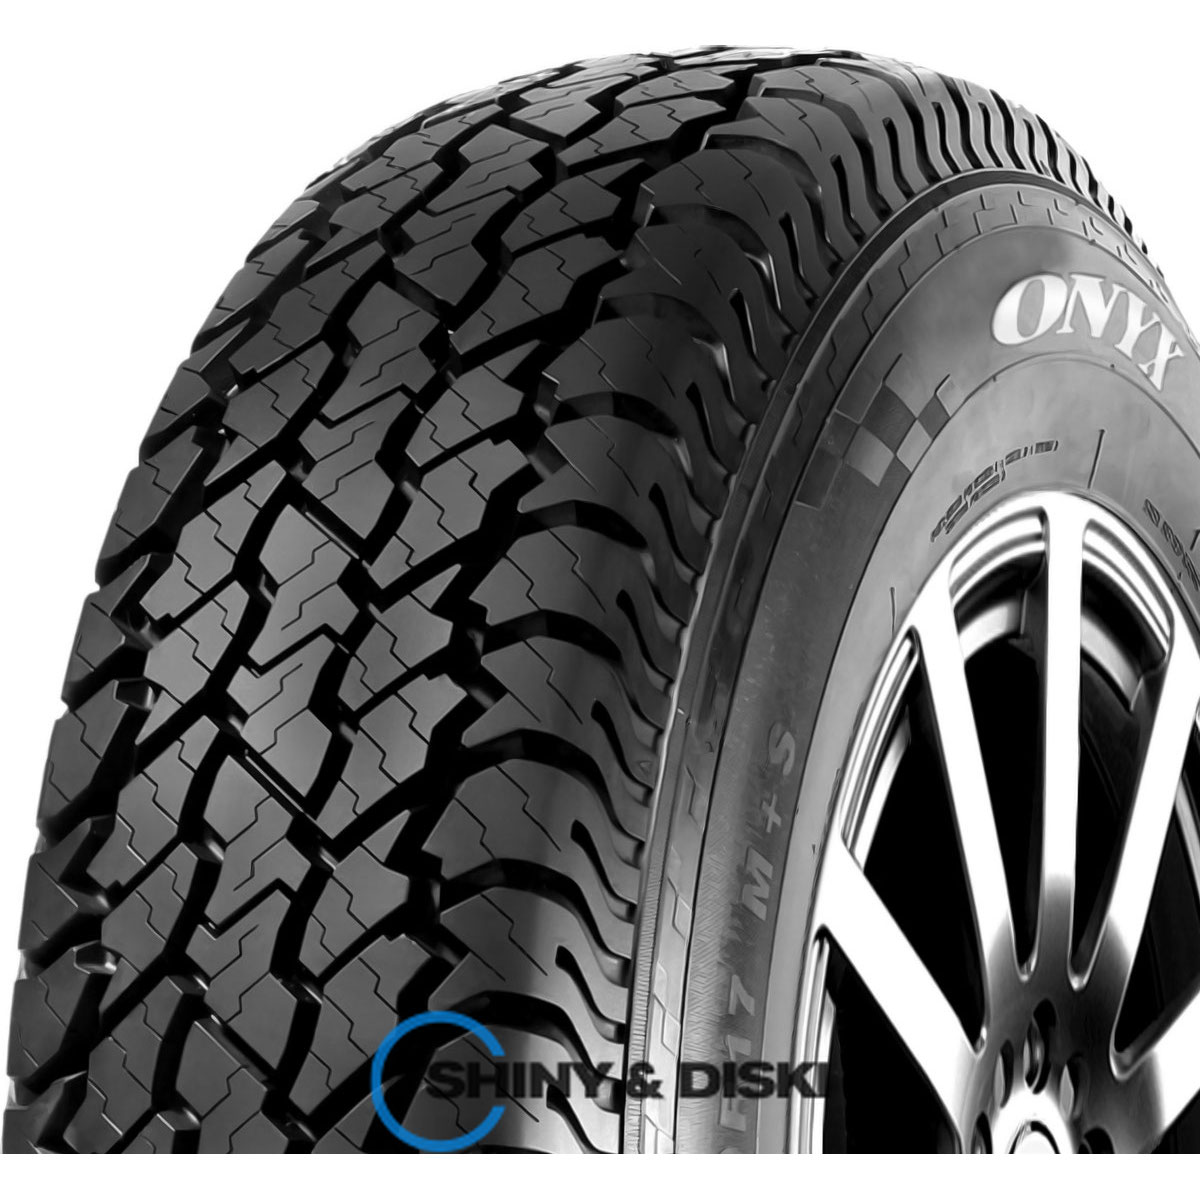 покрышки onyx ny-at187 225/75 r16 115/112s